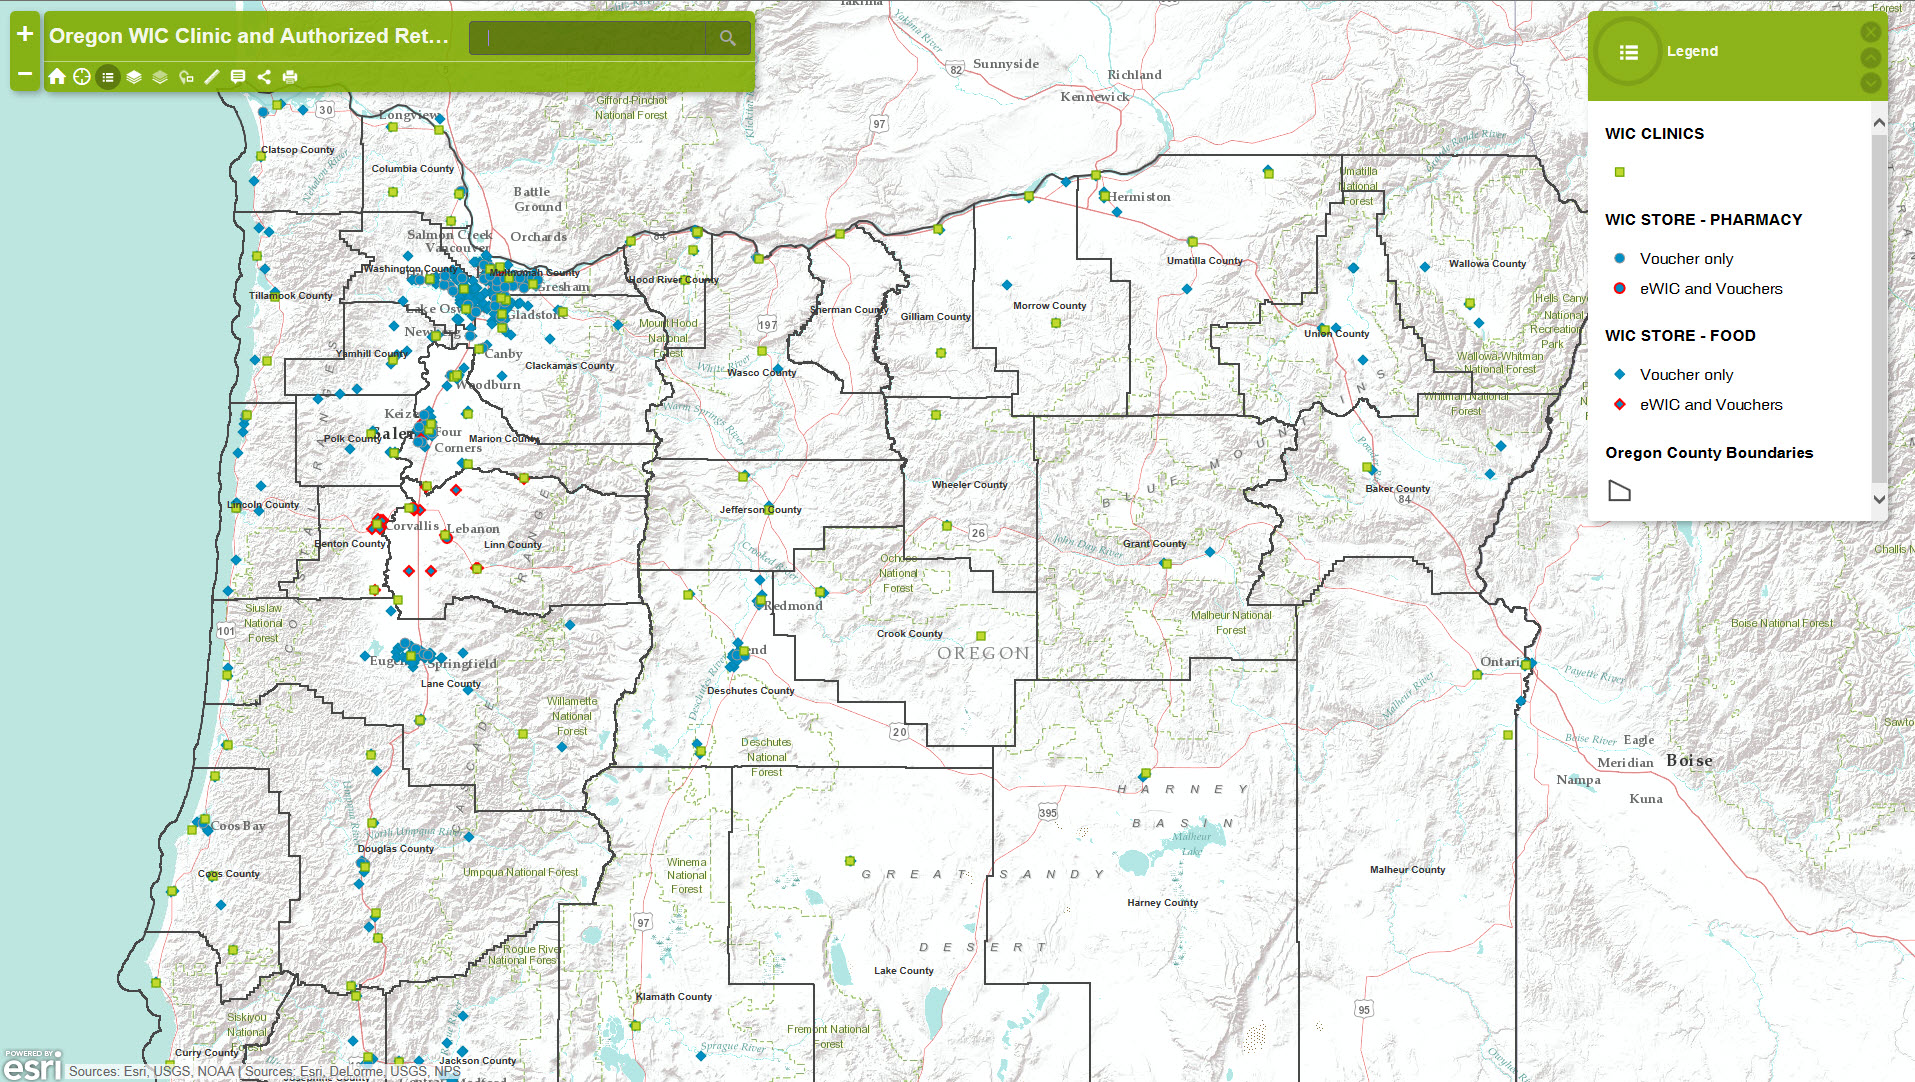 Thumbnail of Oregon map showing locations of stores and clinics